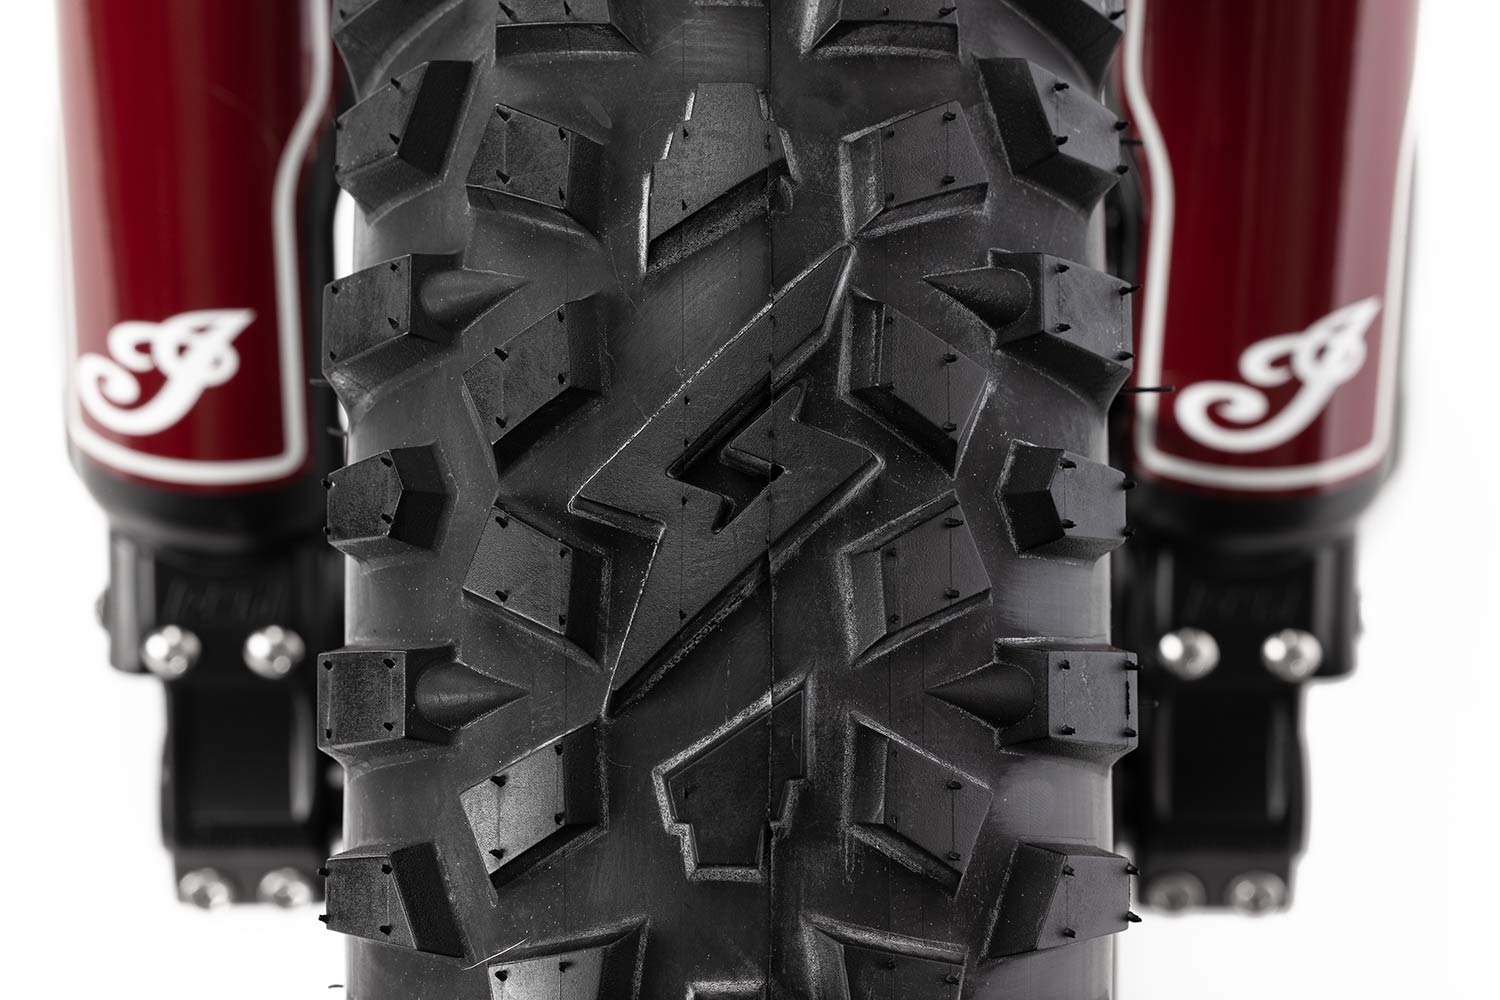 Detail shot of the S2 x Indian MC GRZLY tires.